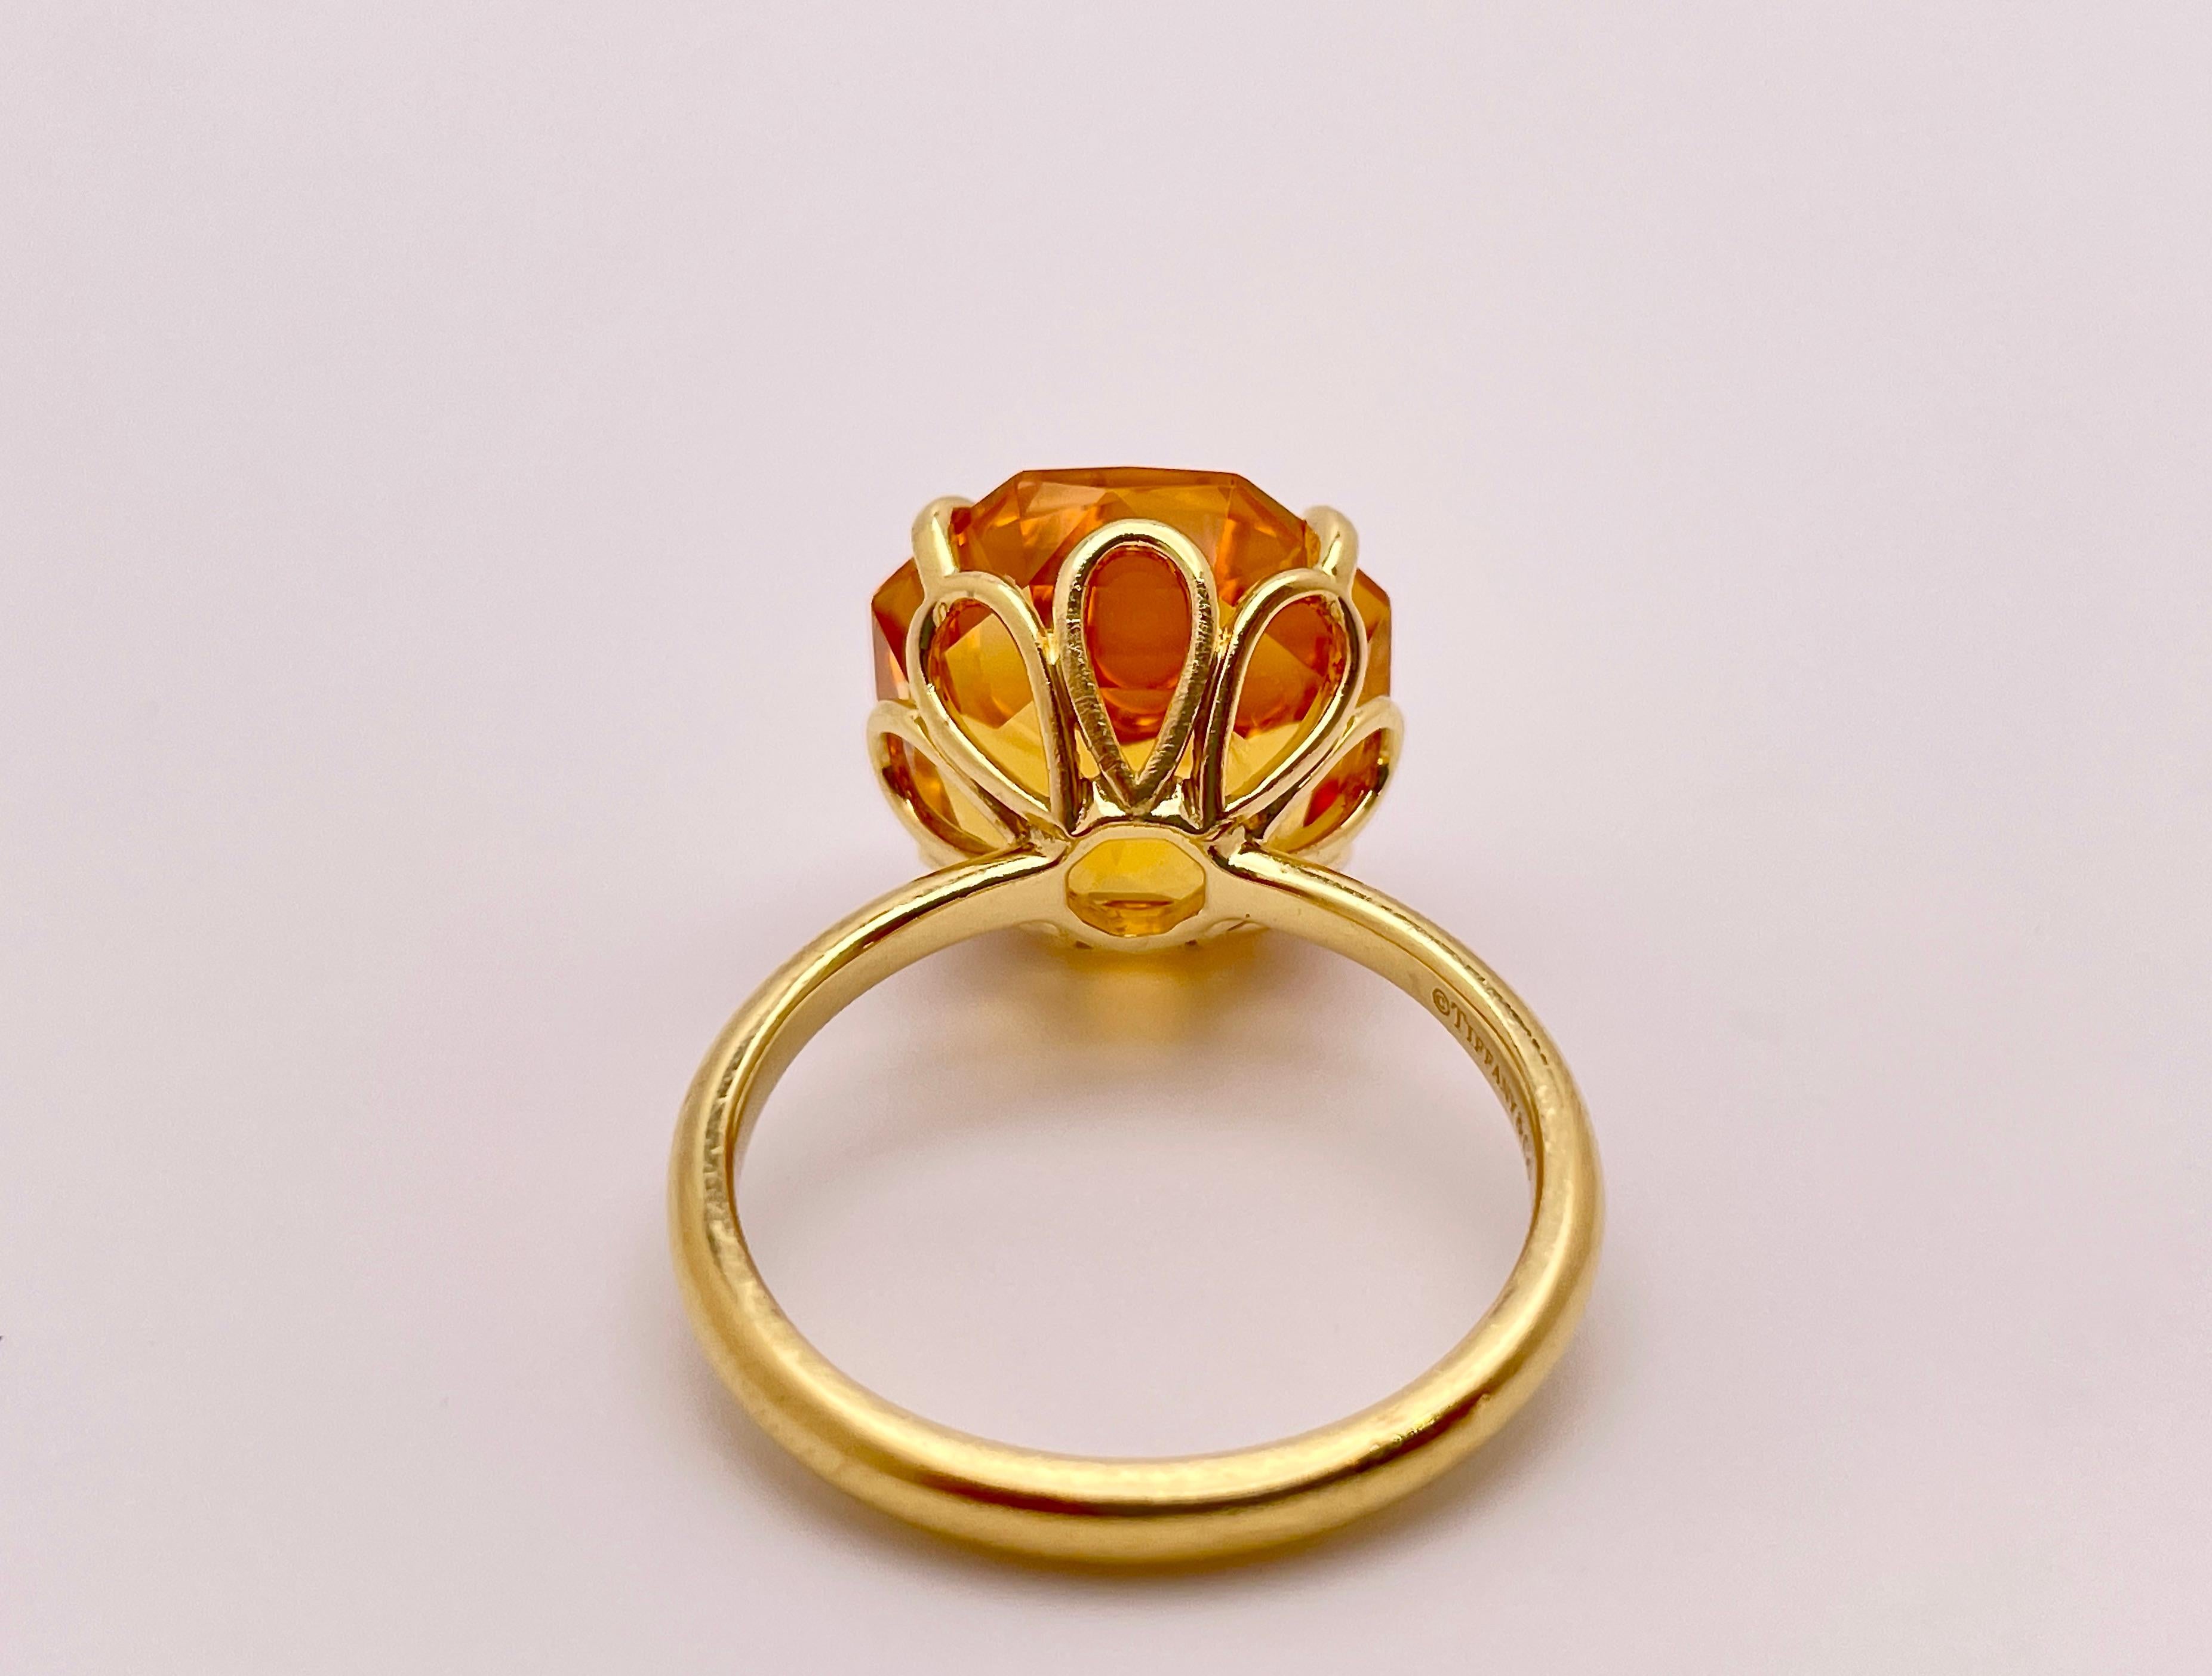 10 Carat Tiffany and Co. Elsa Peretti Citrine 18K Yellow Gold Engagement Ring For Sale 4